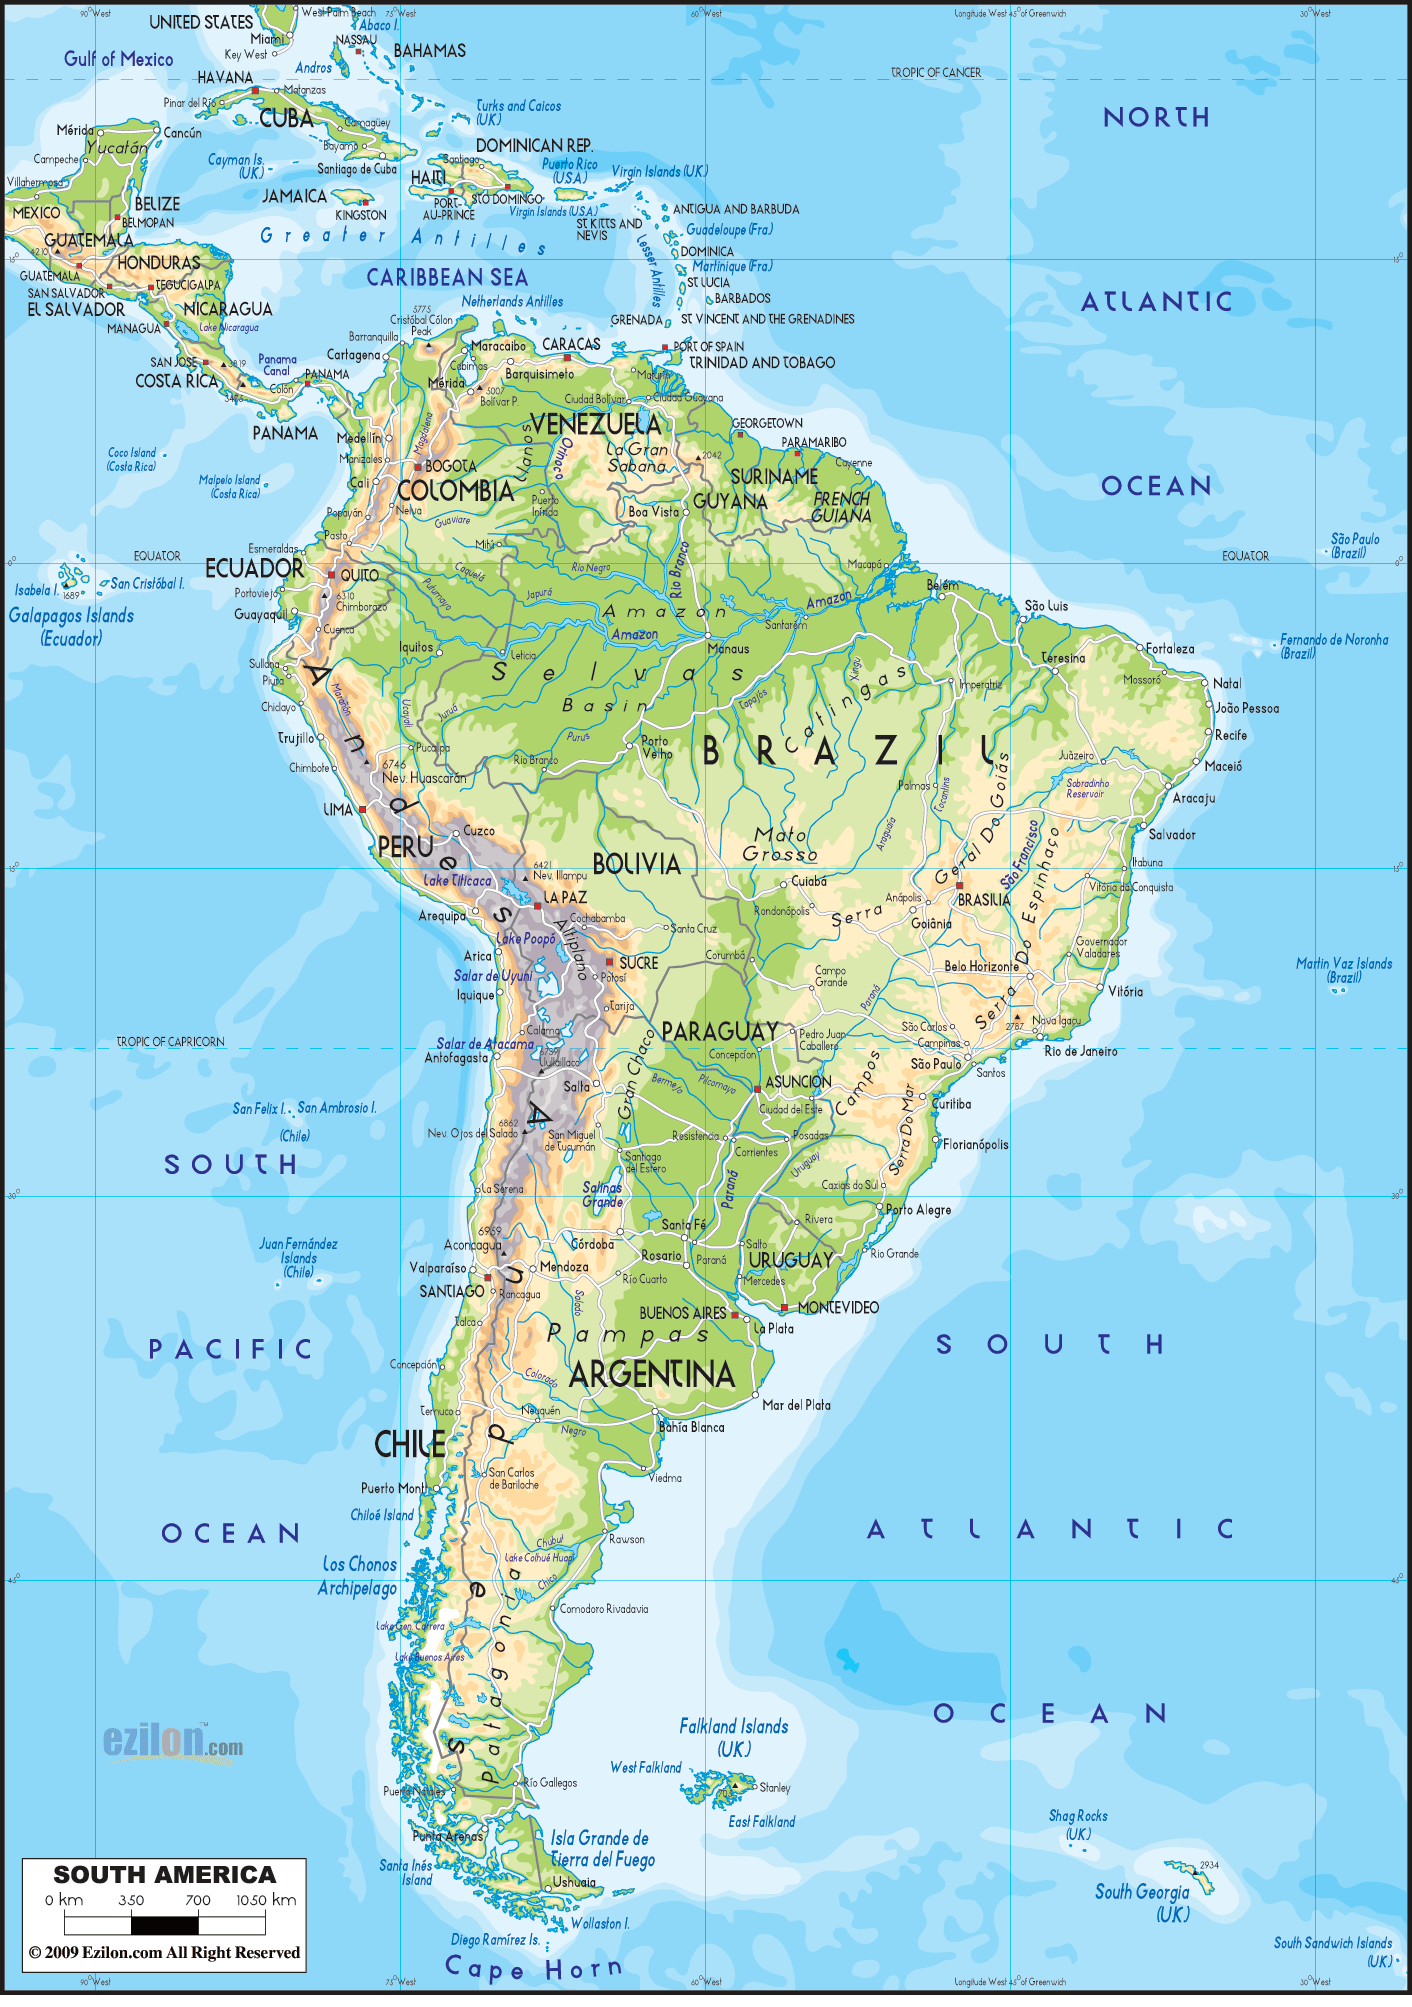 labeled south america physical features map Physical Map Of South America Ezilon Maps labeled south america physical features map